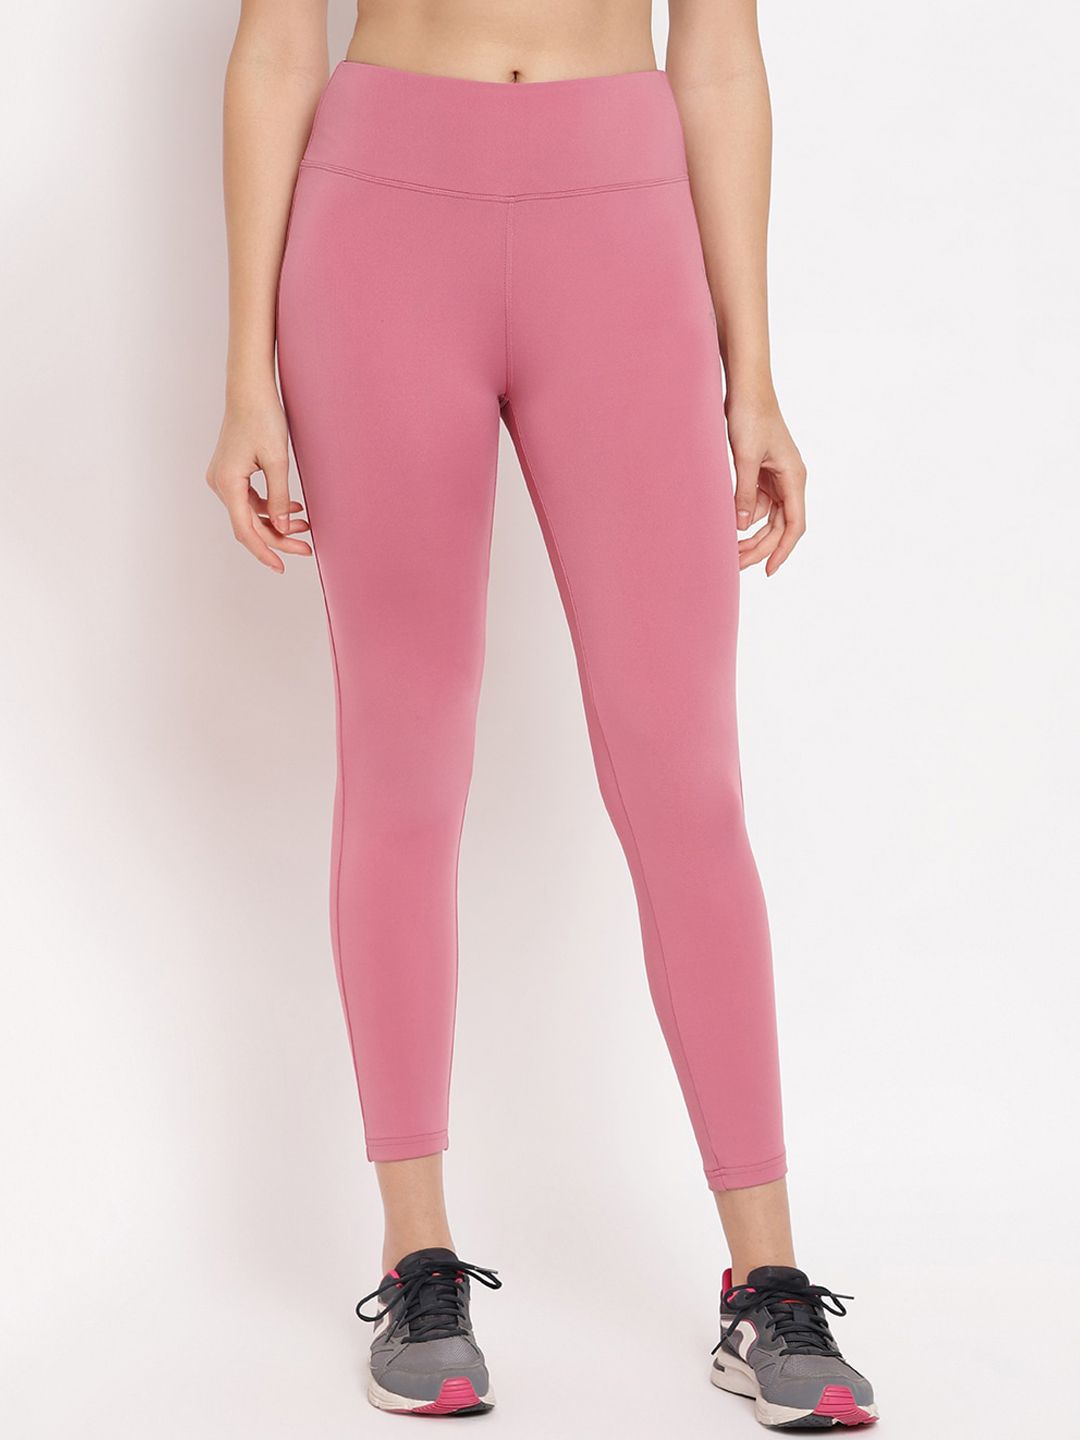 Marc Loire Women Pink Solid Slim-Fit Dry-Fit Tights Price in India